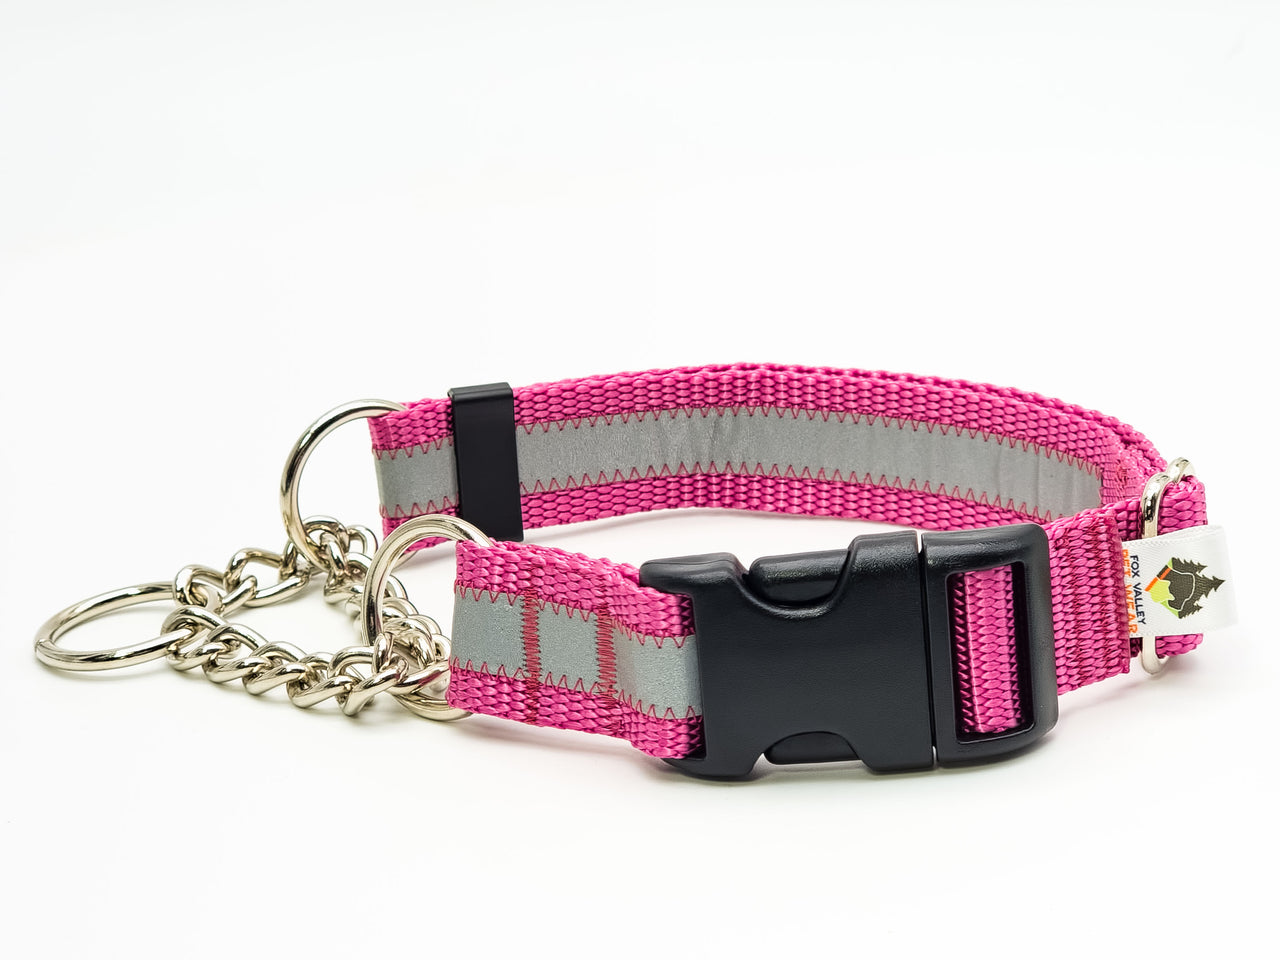 Quick Release Chain Martingale | reflective Rose | Large 16"-22" in 1" wide